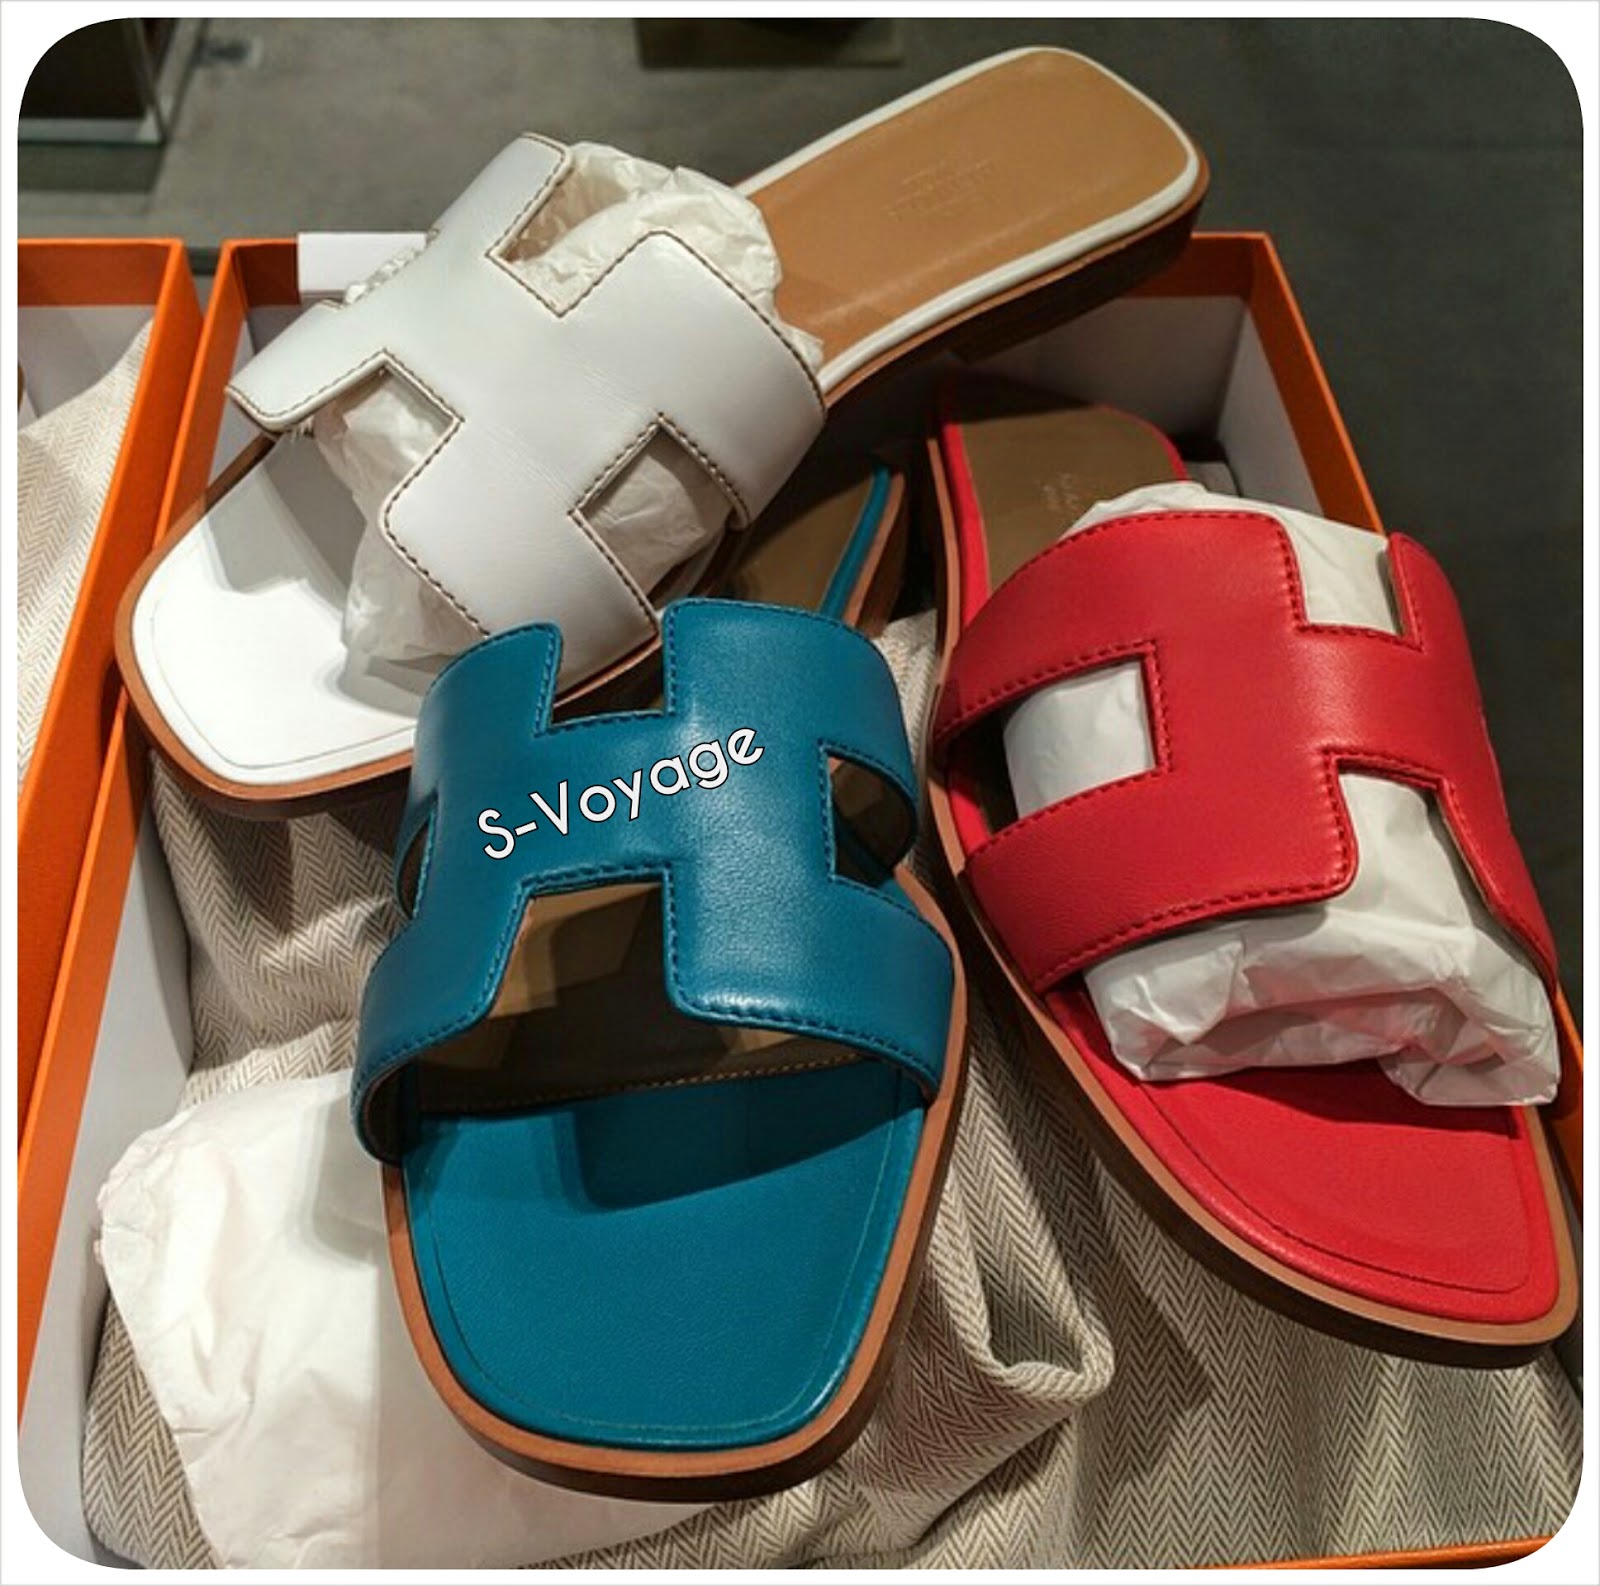 Always Authentic @ S-Voyage: Hermes Oran H Sandal available for pre-order.